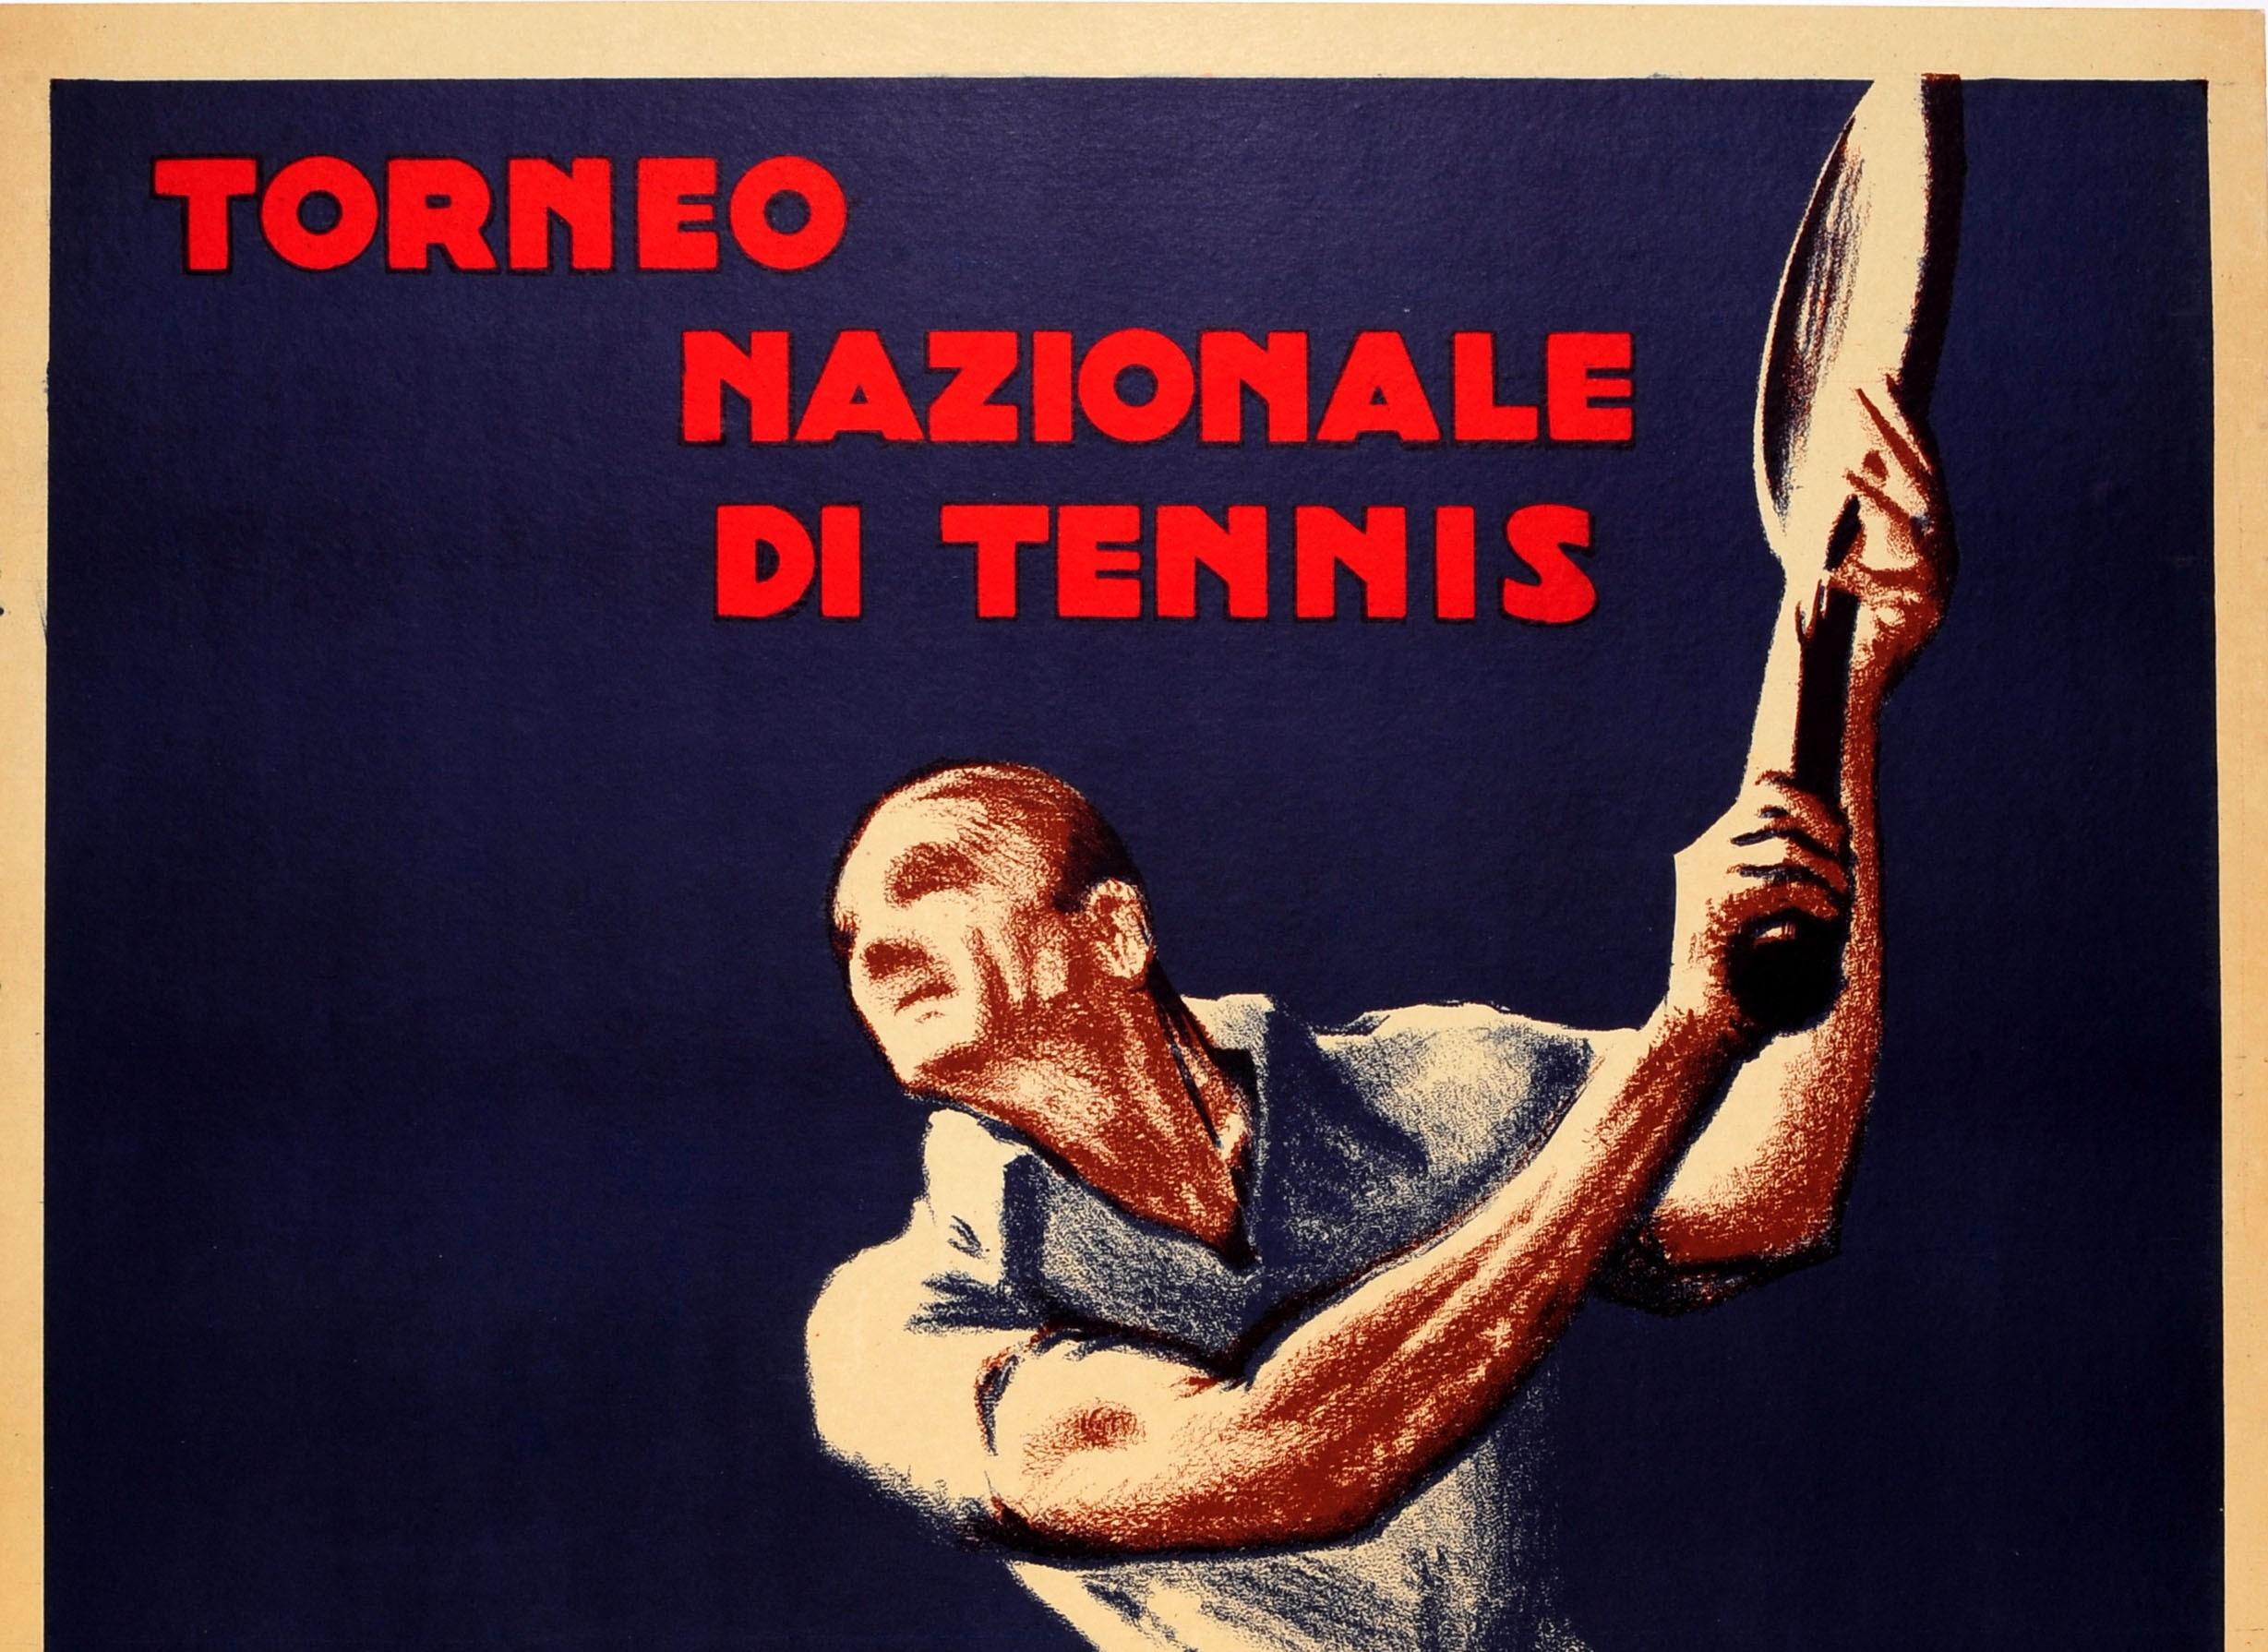 Original vintage sport poster for the Torneo Nazionale Di Tennis / National Tennis Tournament published by the Italian Tennis Federation. Dynamic art deco style illustration of a tennis player wearing a white shirt and trousers against the blue